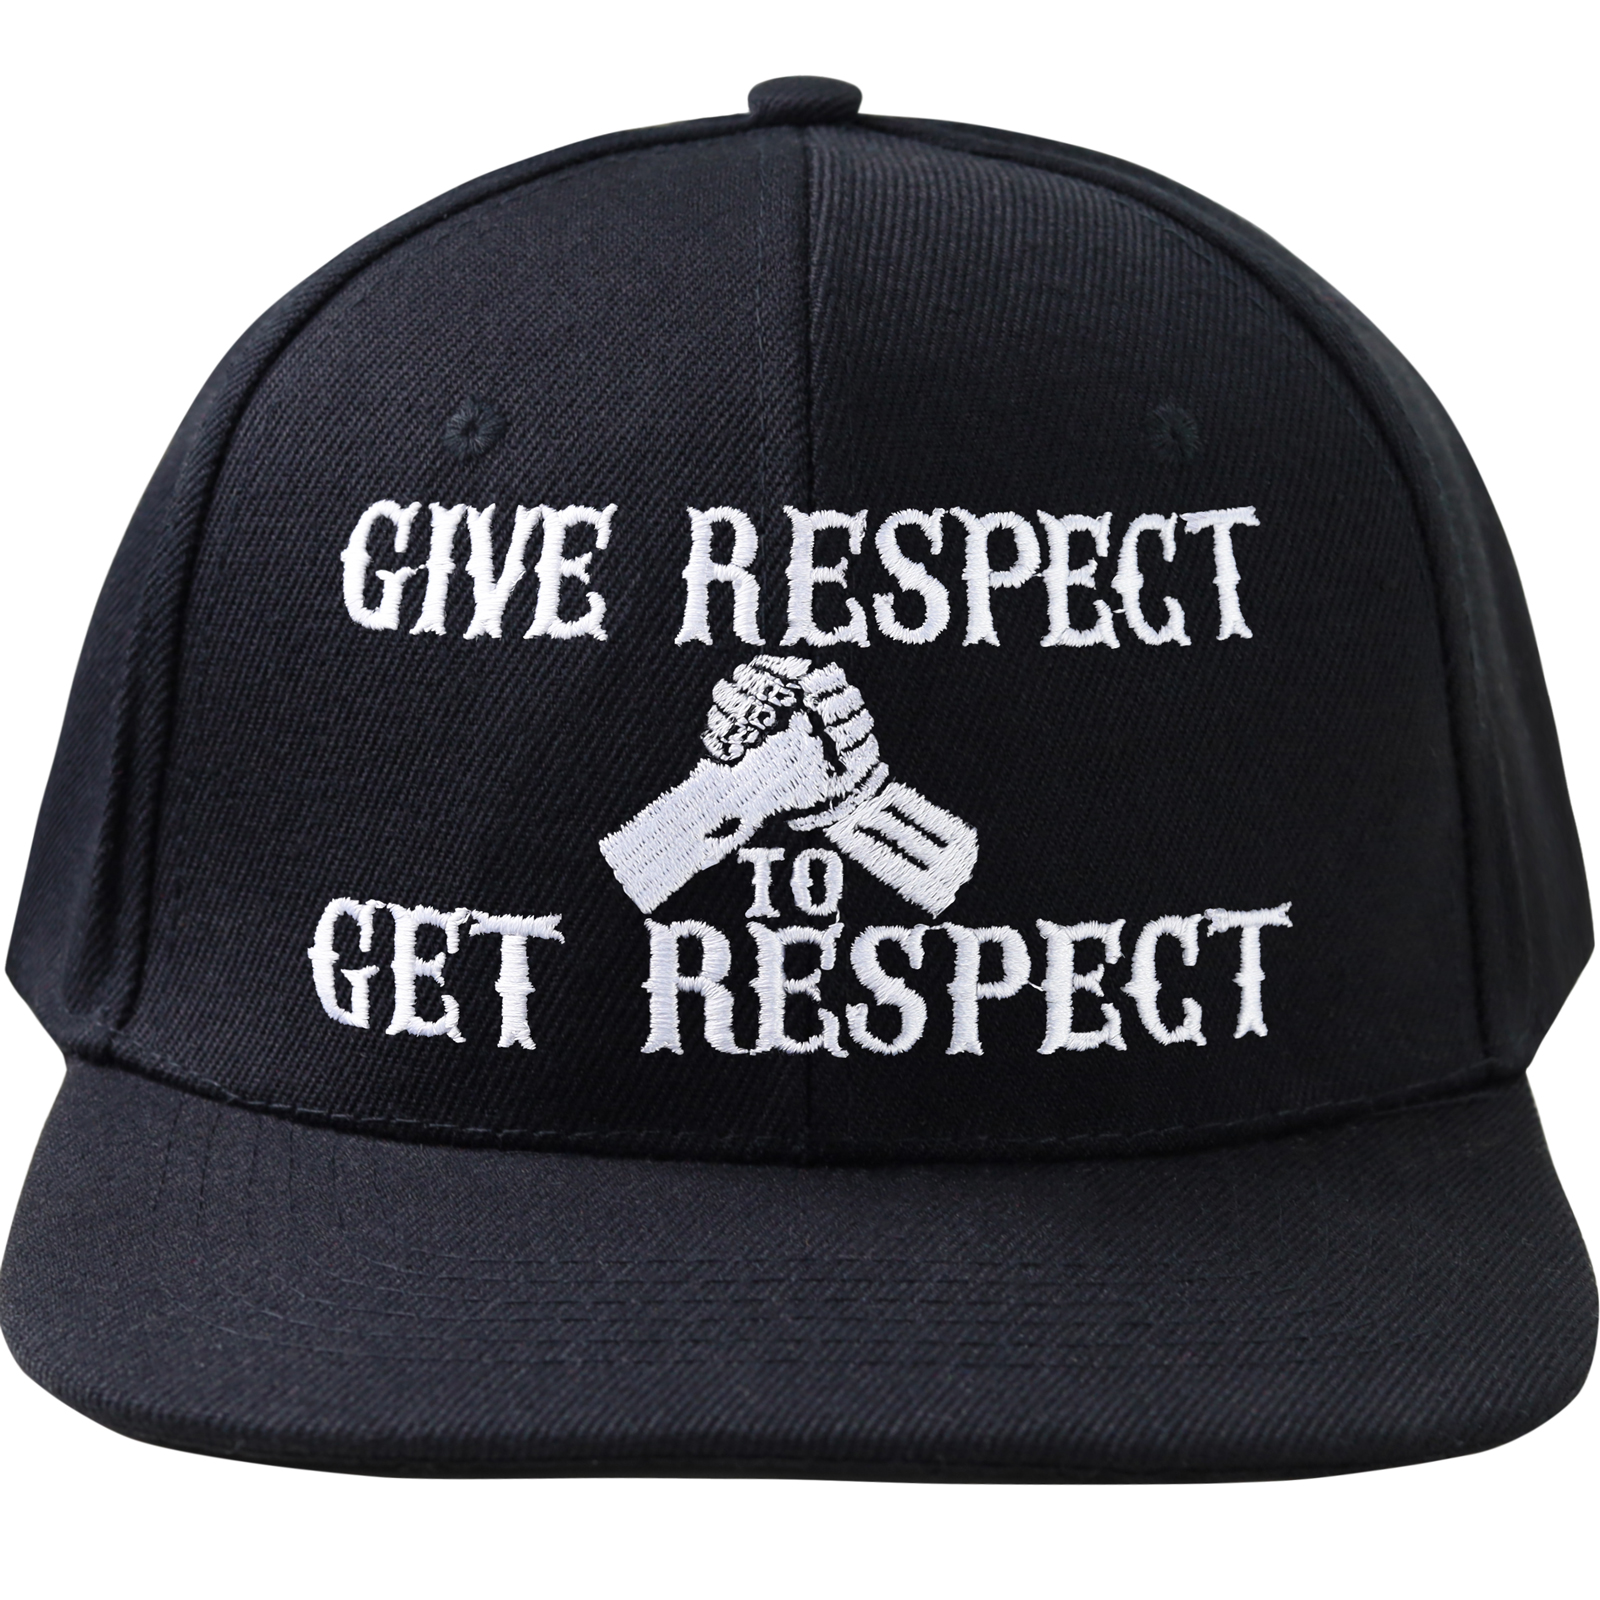 Give respect to get respect - Kappe